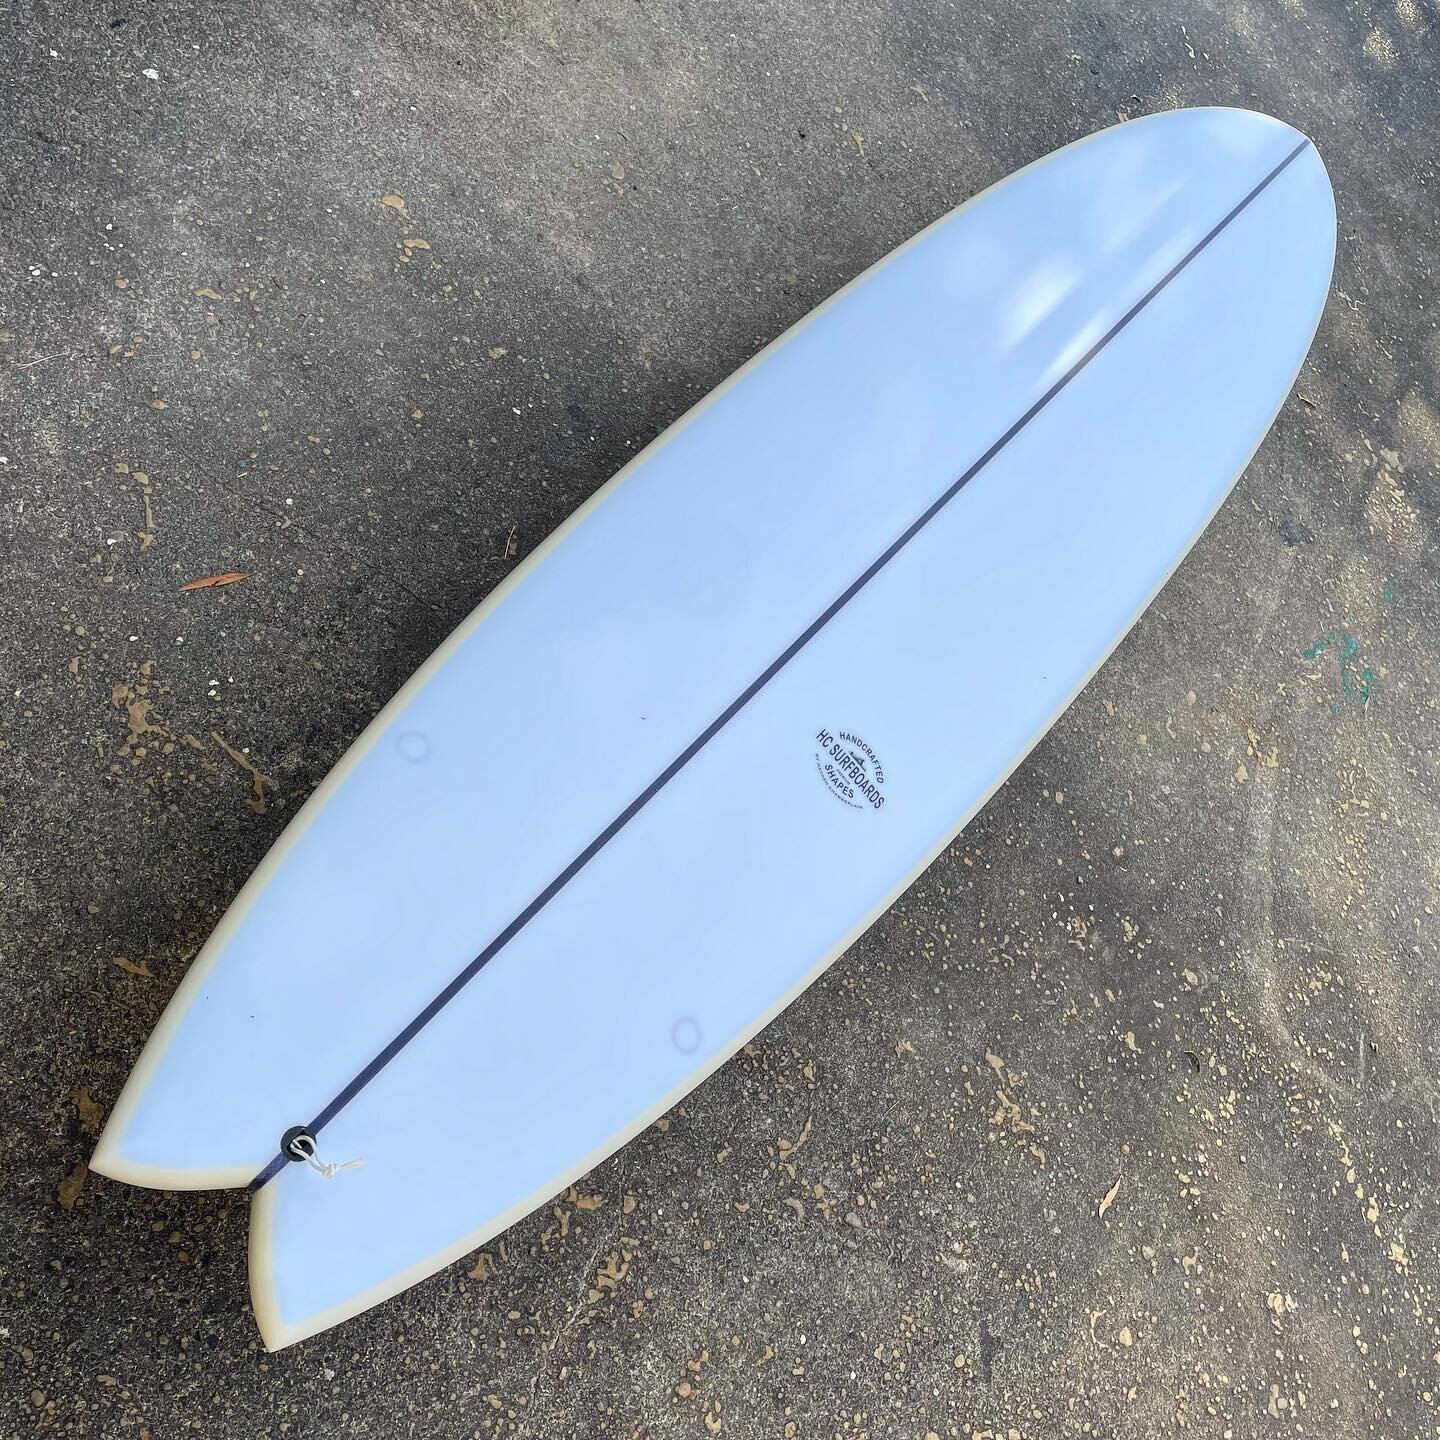 7&rsquo;6&rdquo; x 22 1/2&rdquo; x 2 1/8&rdquo; Thin Twinzer for @aaronmcilwee. This build was hard one to get looking right and to make everything fit with it being so thin, but I love a challenge now and then! We glassed it in our Epoxy skin constr